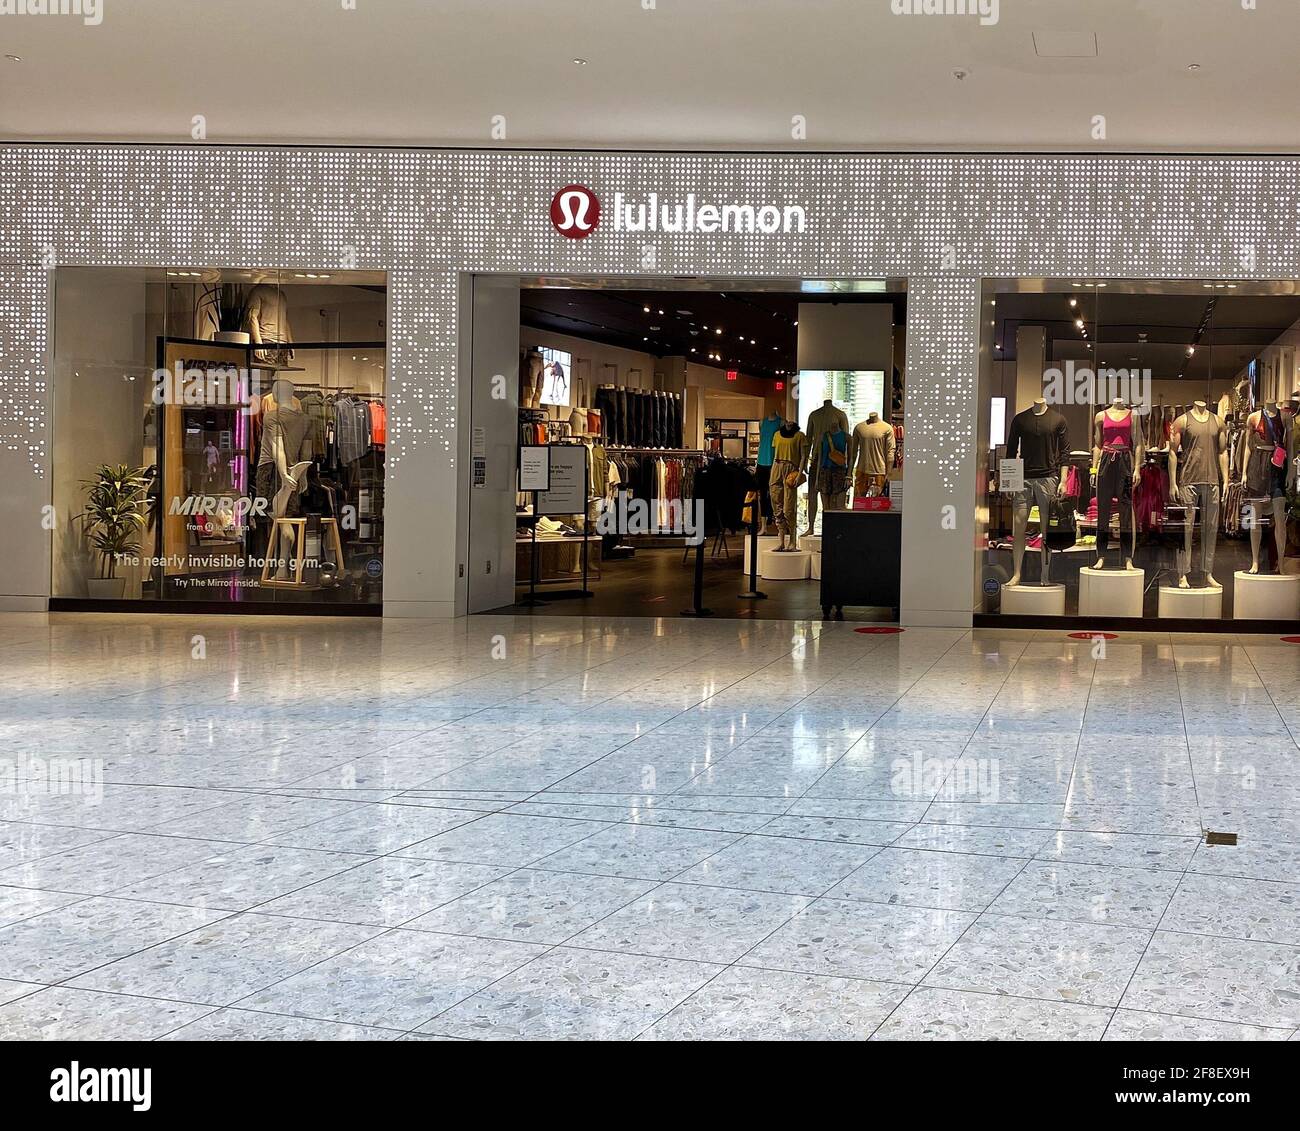 Lululemon Athletica workout clothing boutique storefront inside Aventura mall in south Florida Technical athletic clothes for yoga running working out Stock Photo